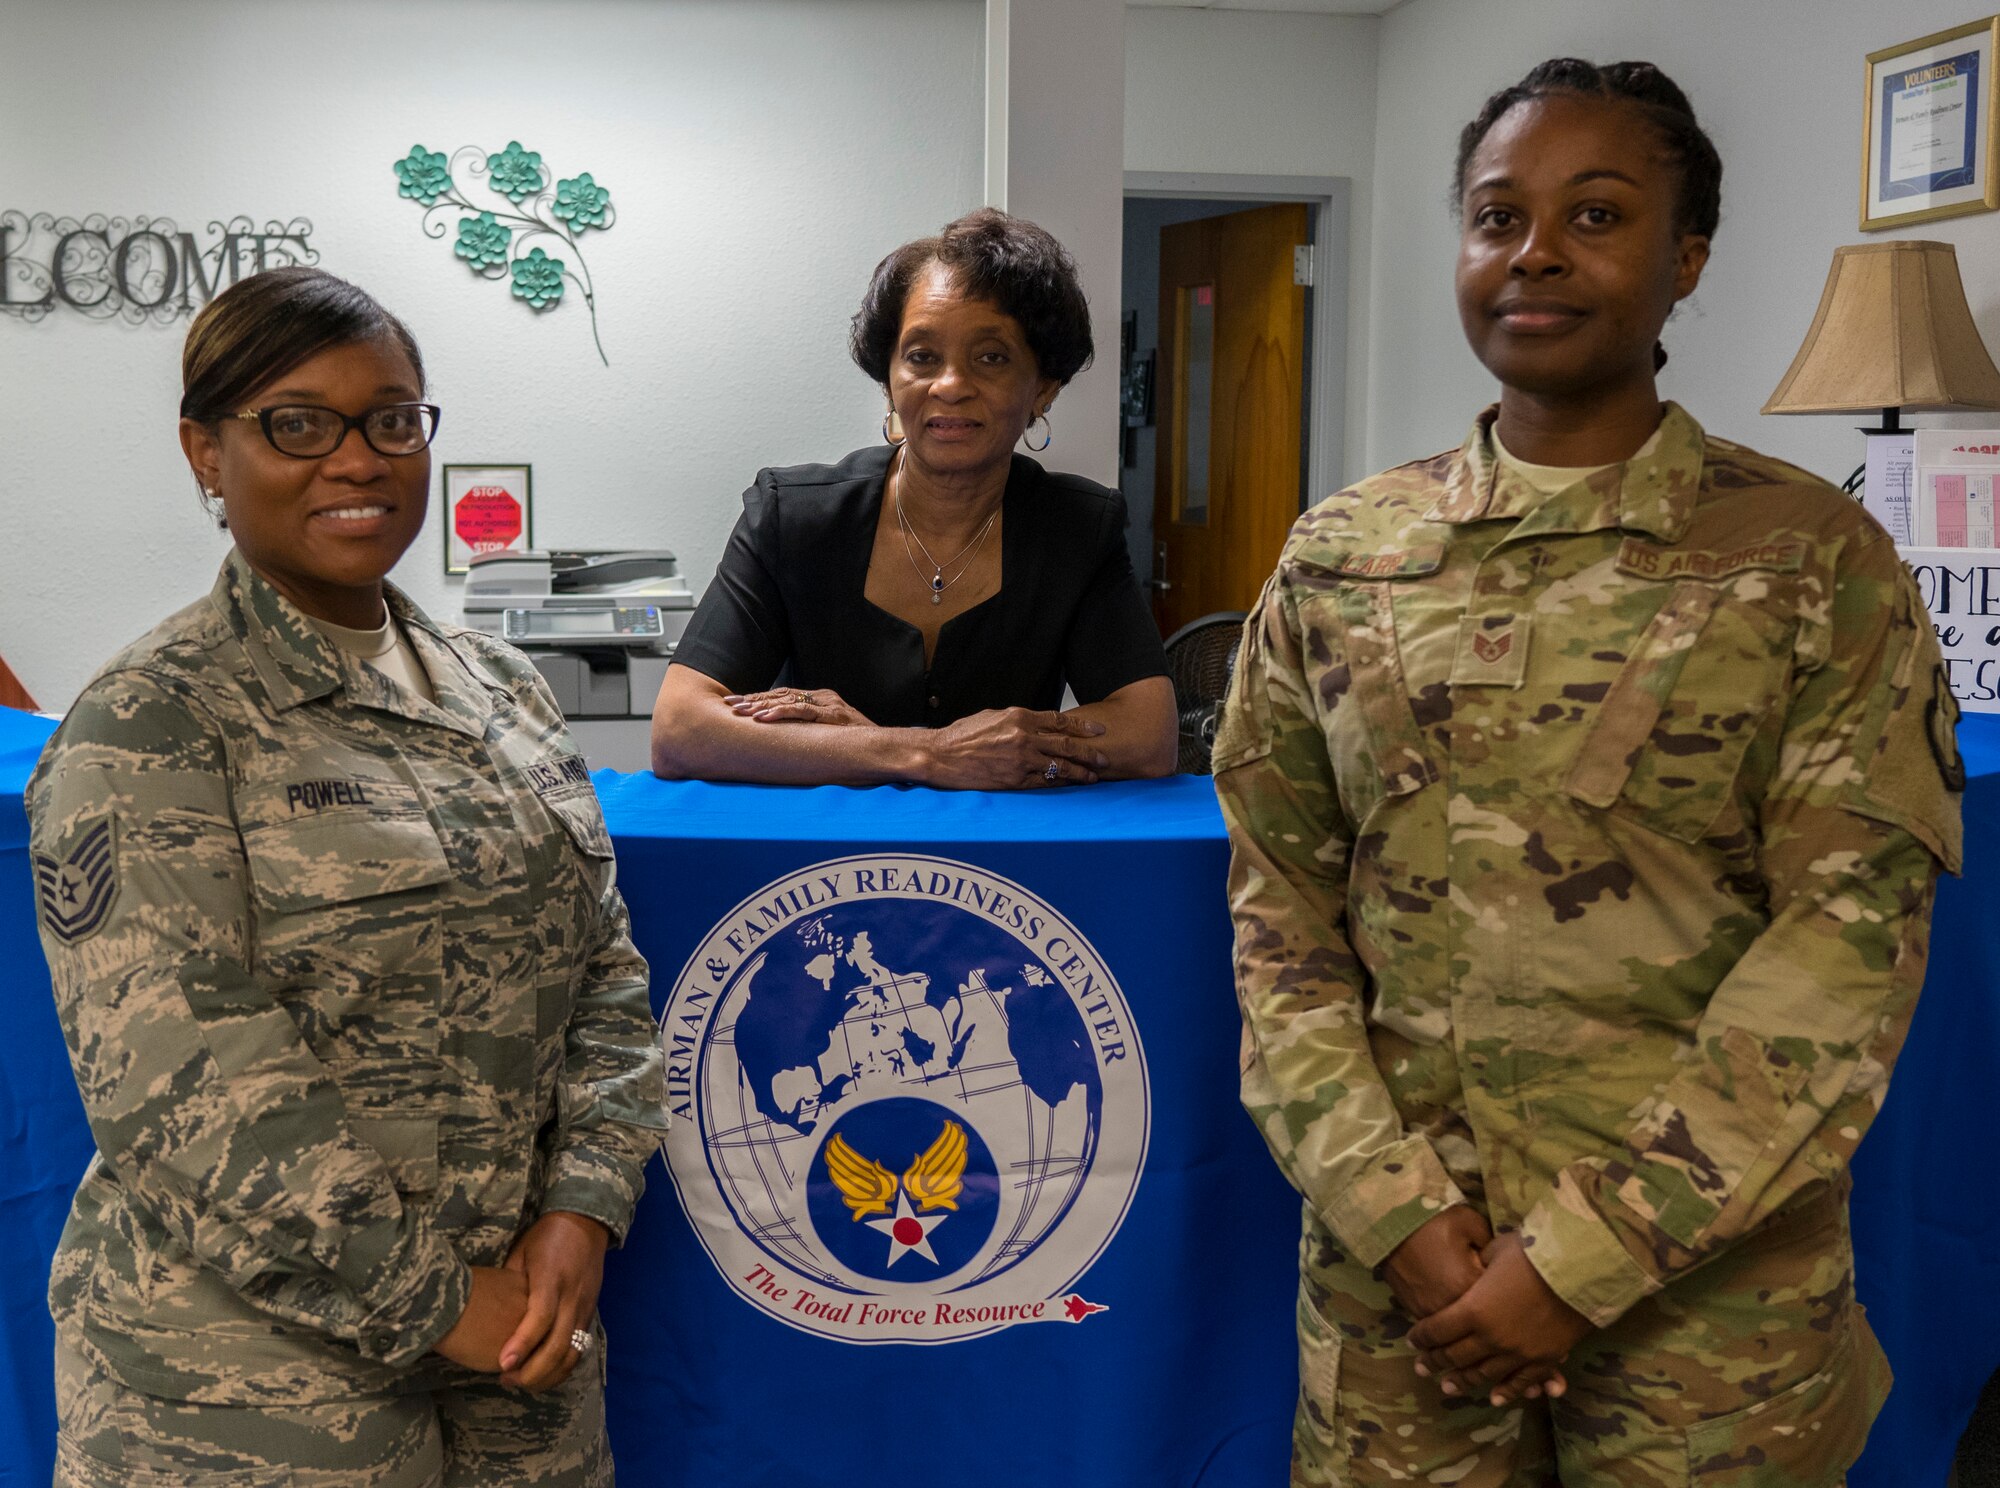 The 403rd Wing’s Airman and Family Readiness Center is a one-stop-shop that connects Reserve Citizen Airmen with a variety of programs and resources that are available for their betterment.